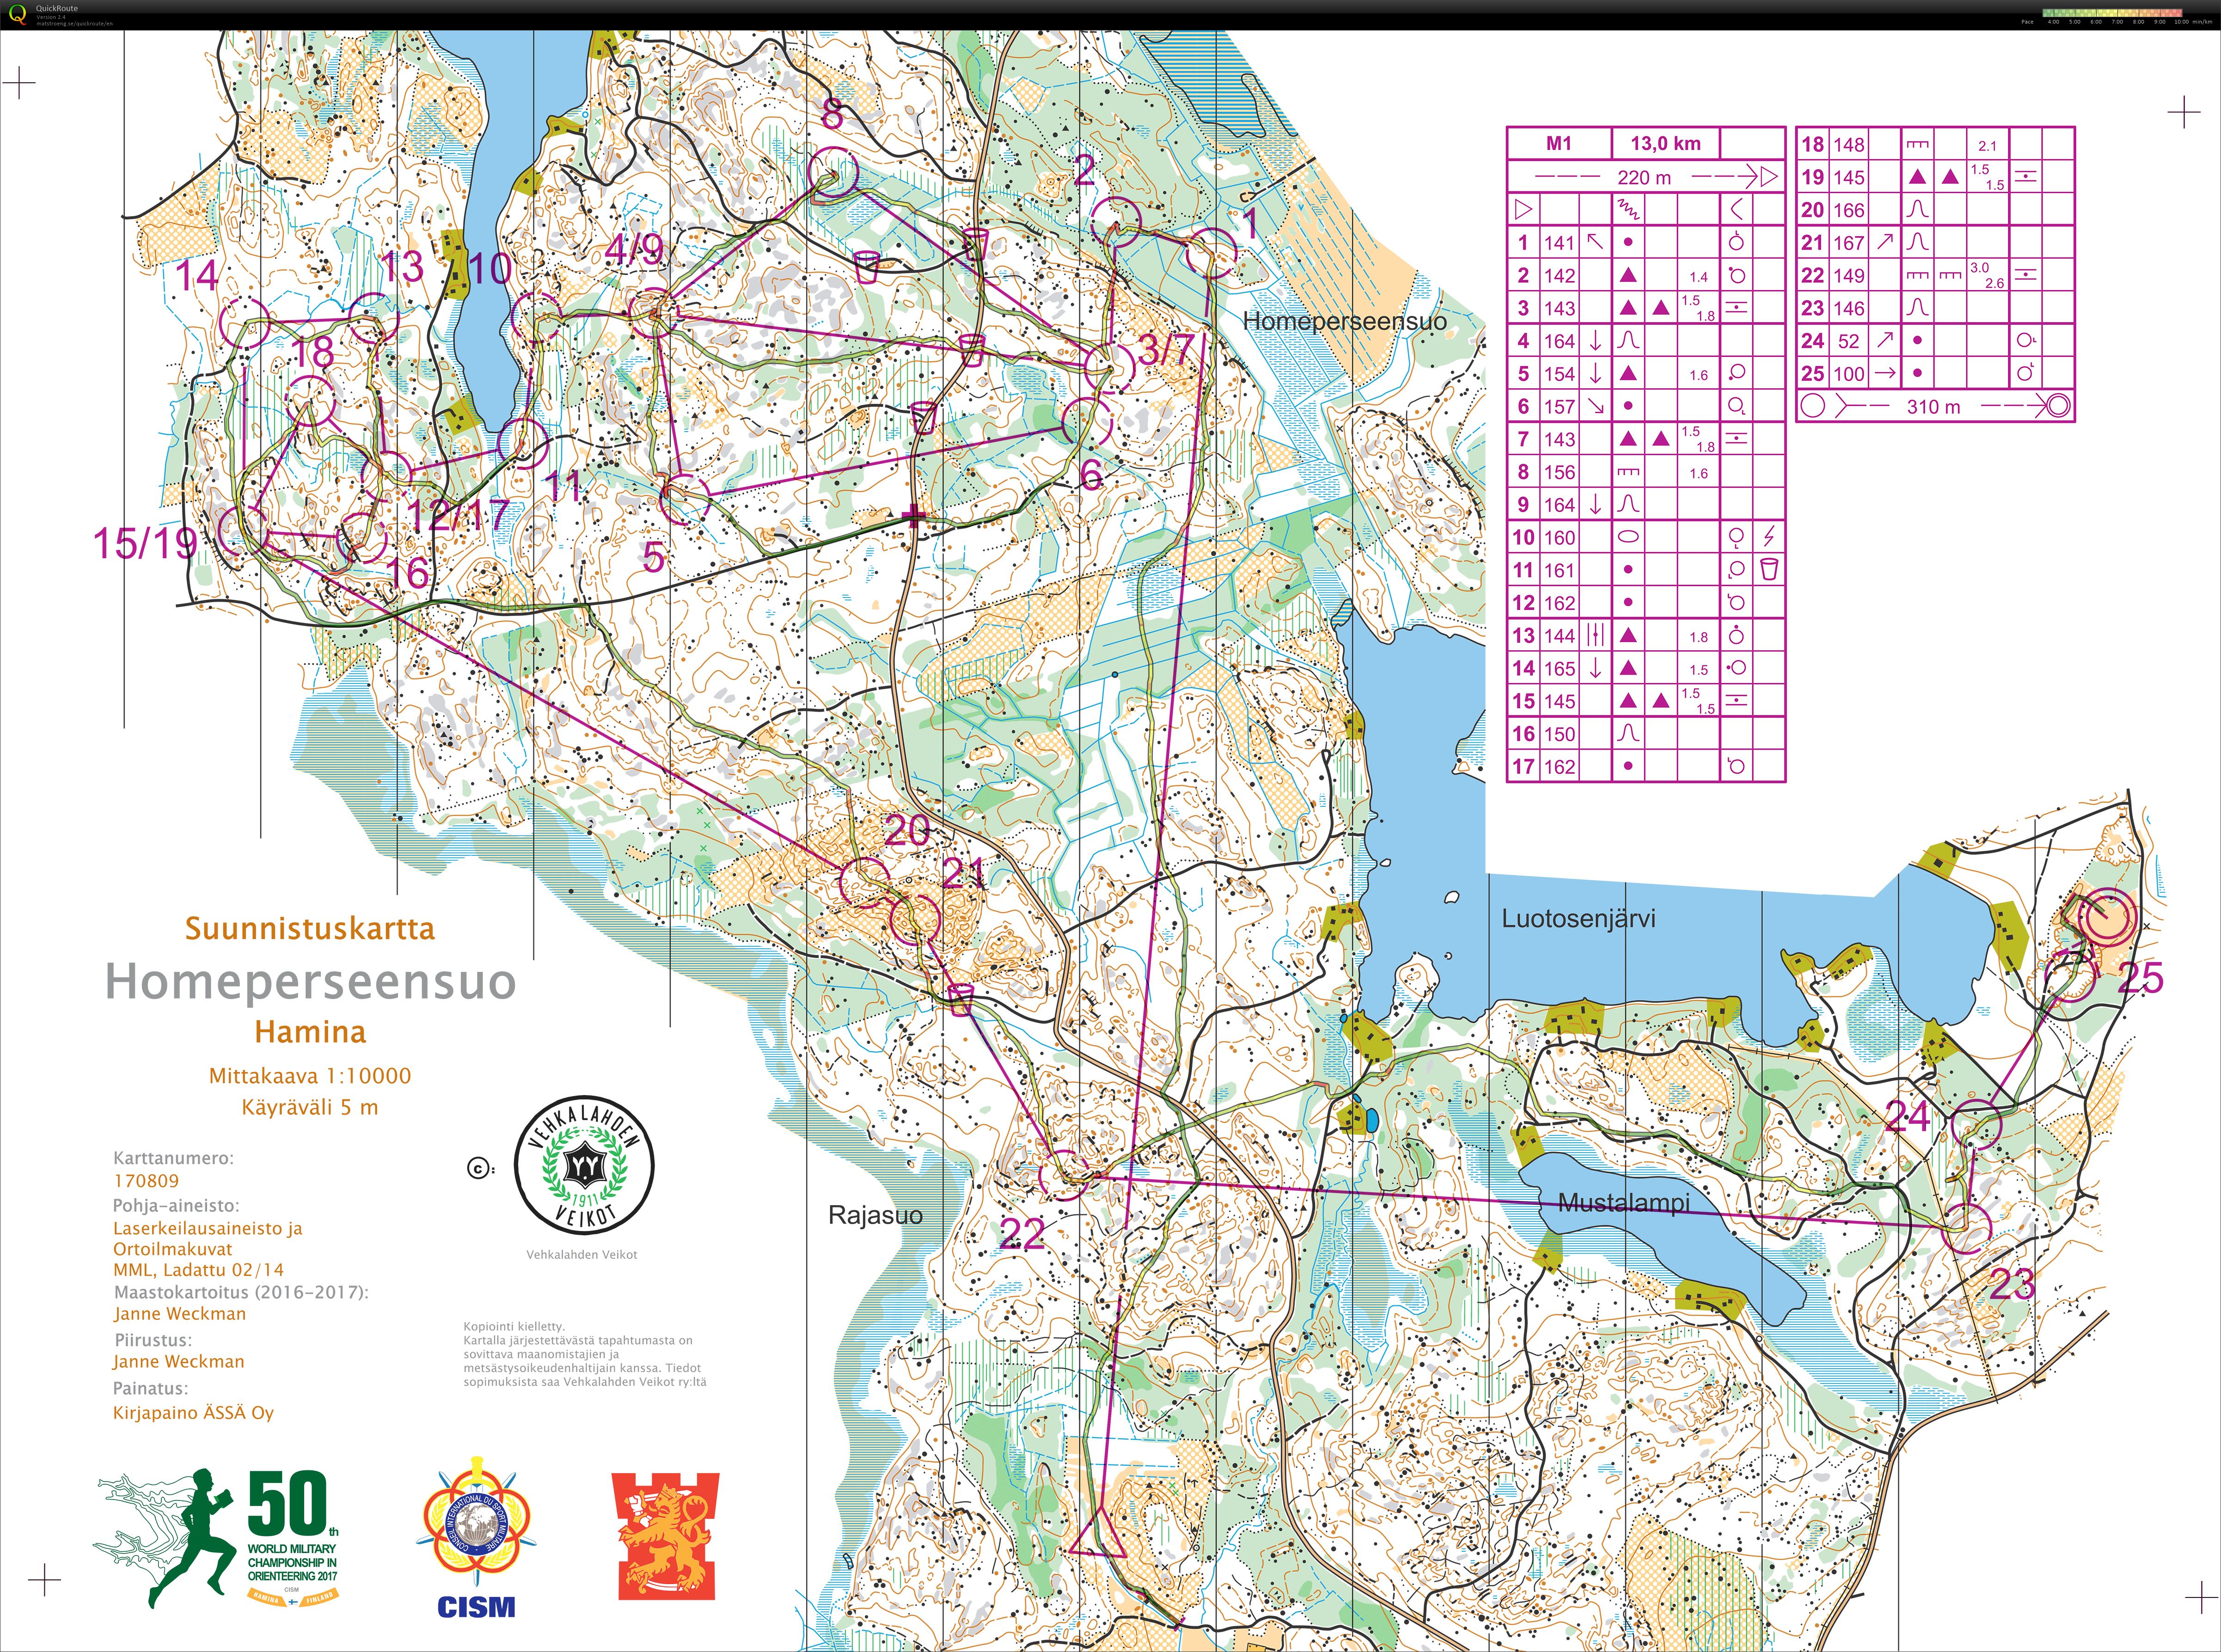 CISM World Military Orienteering Championships | Long (2017-06-13)